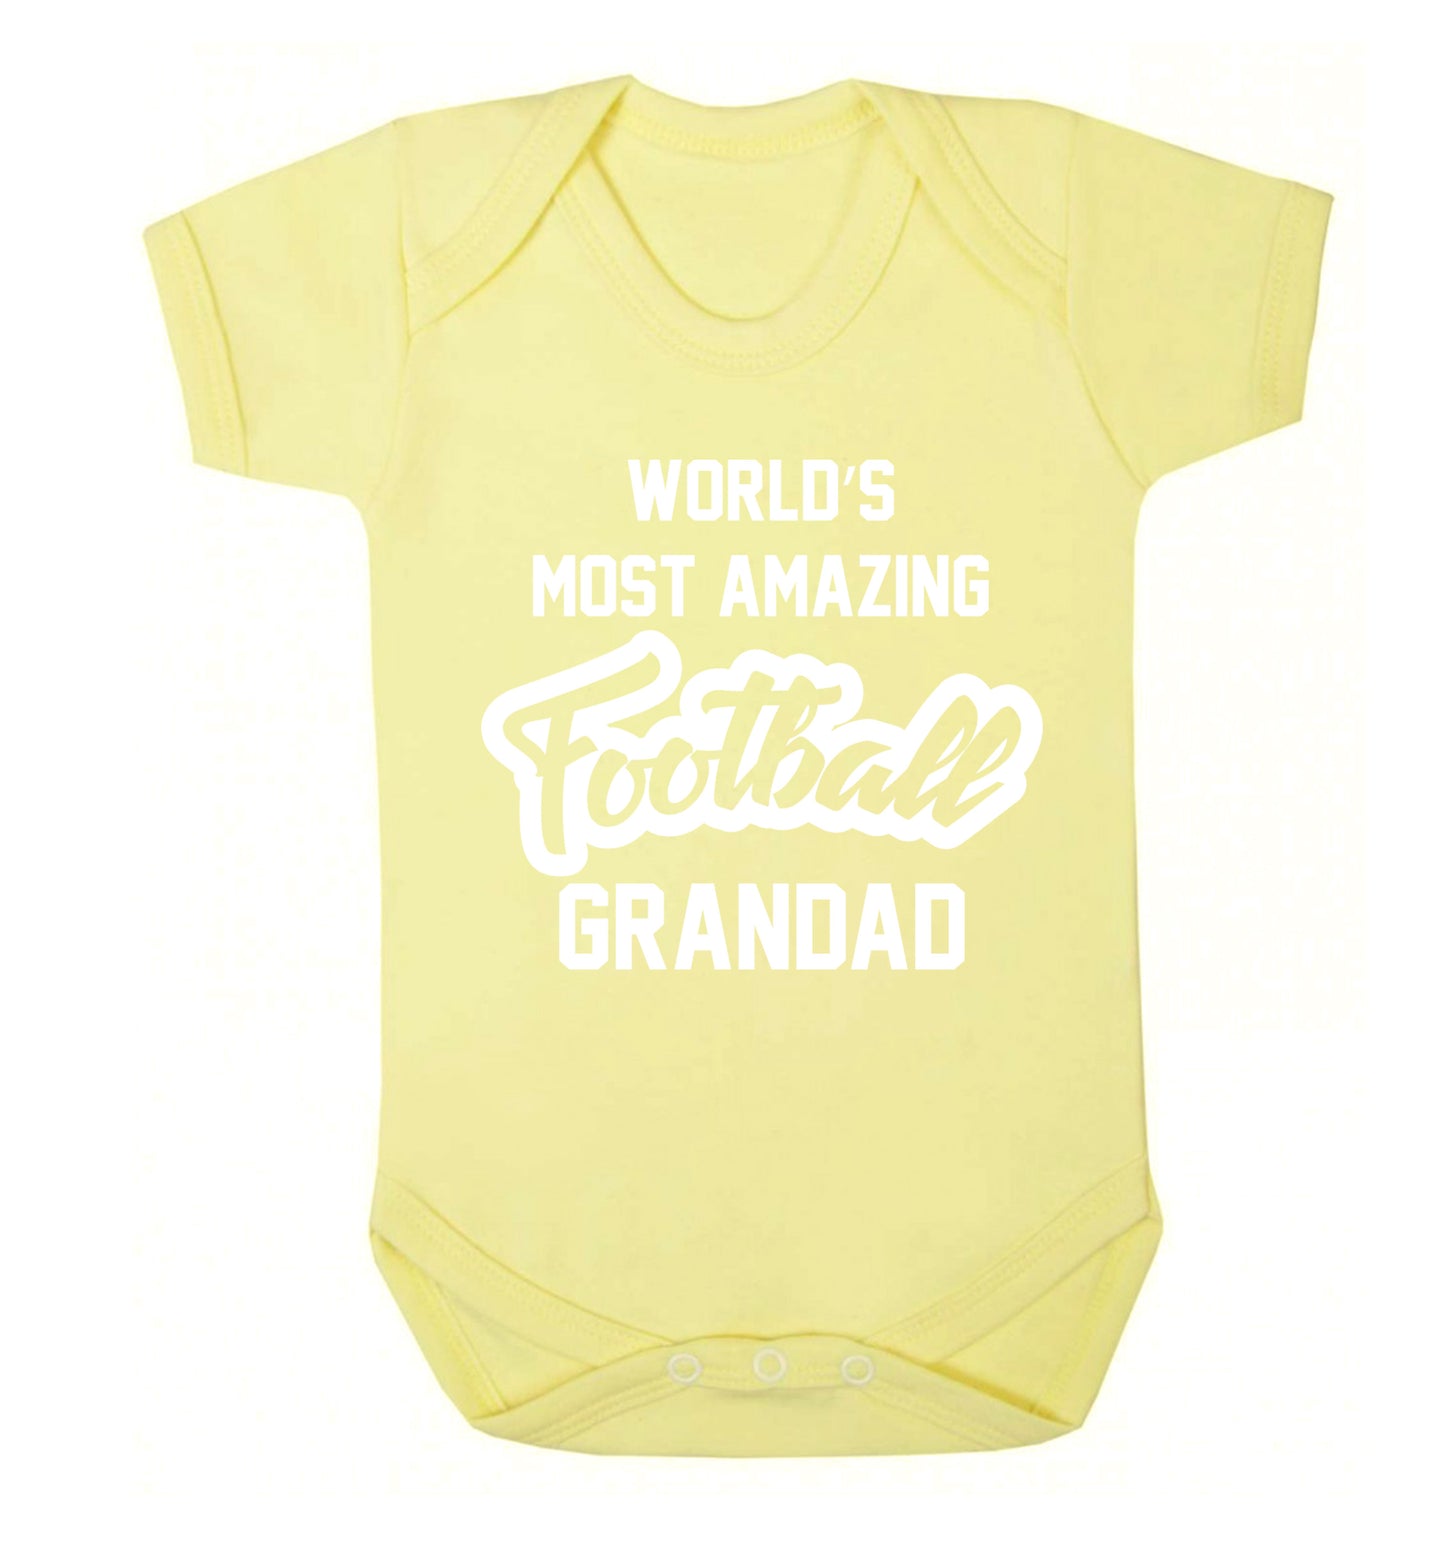 Worlds most amazing football grandad Baby Vest pale yellow 18-24 months